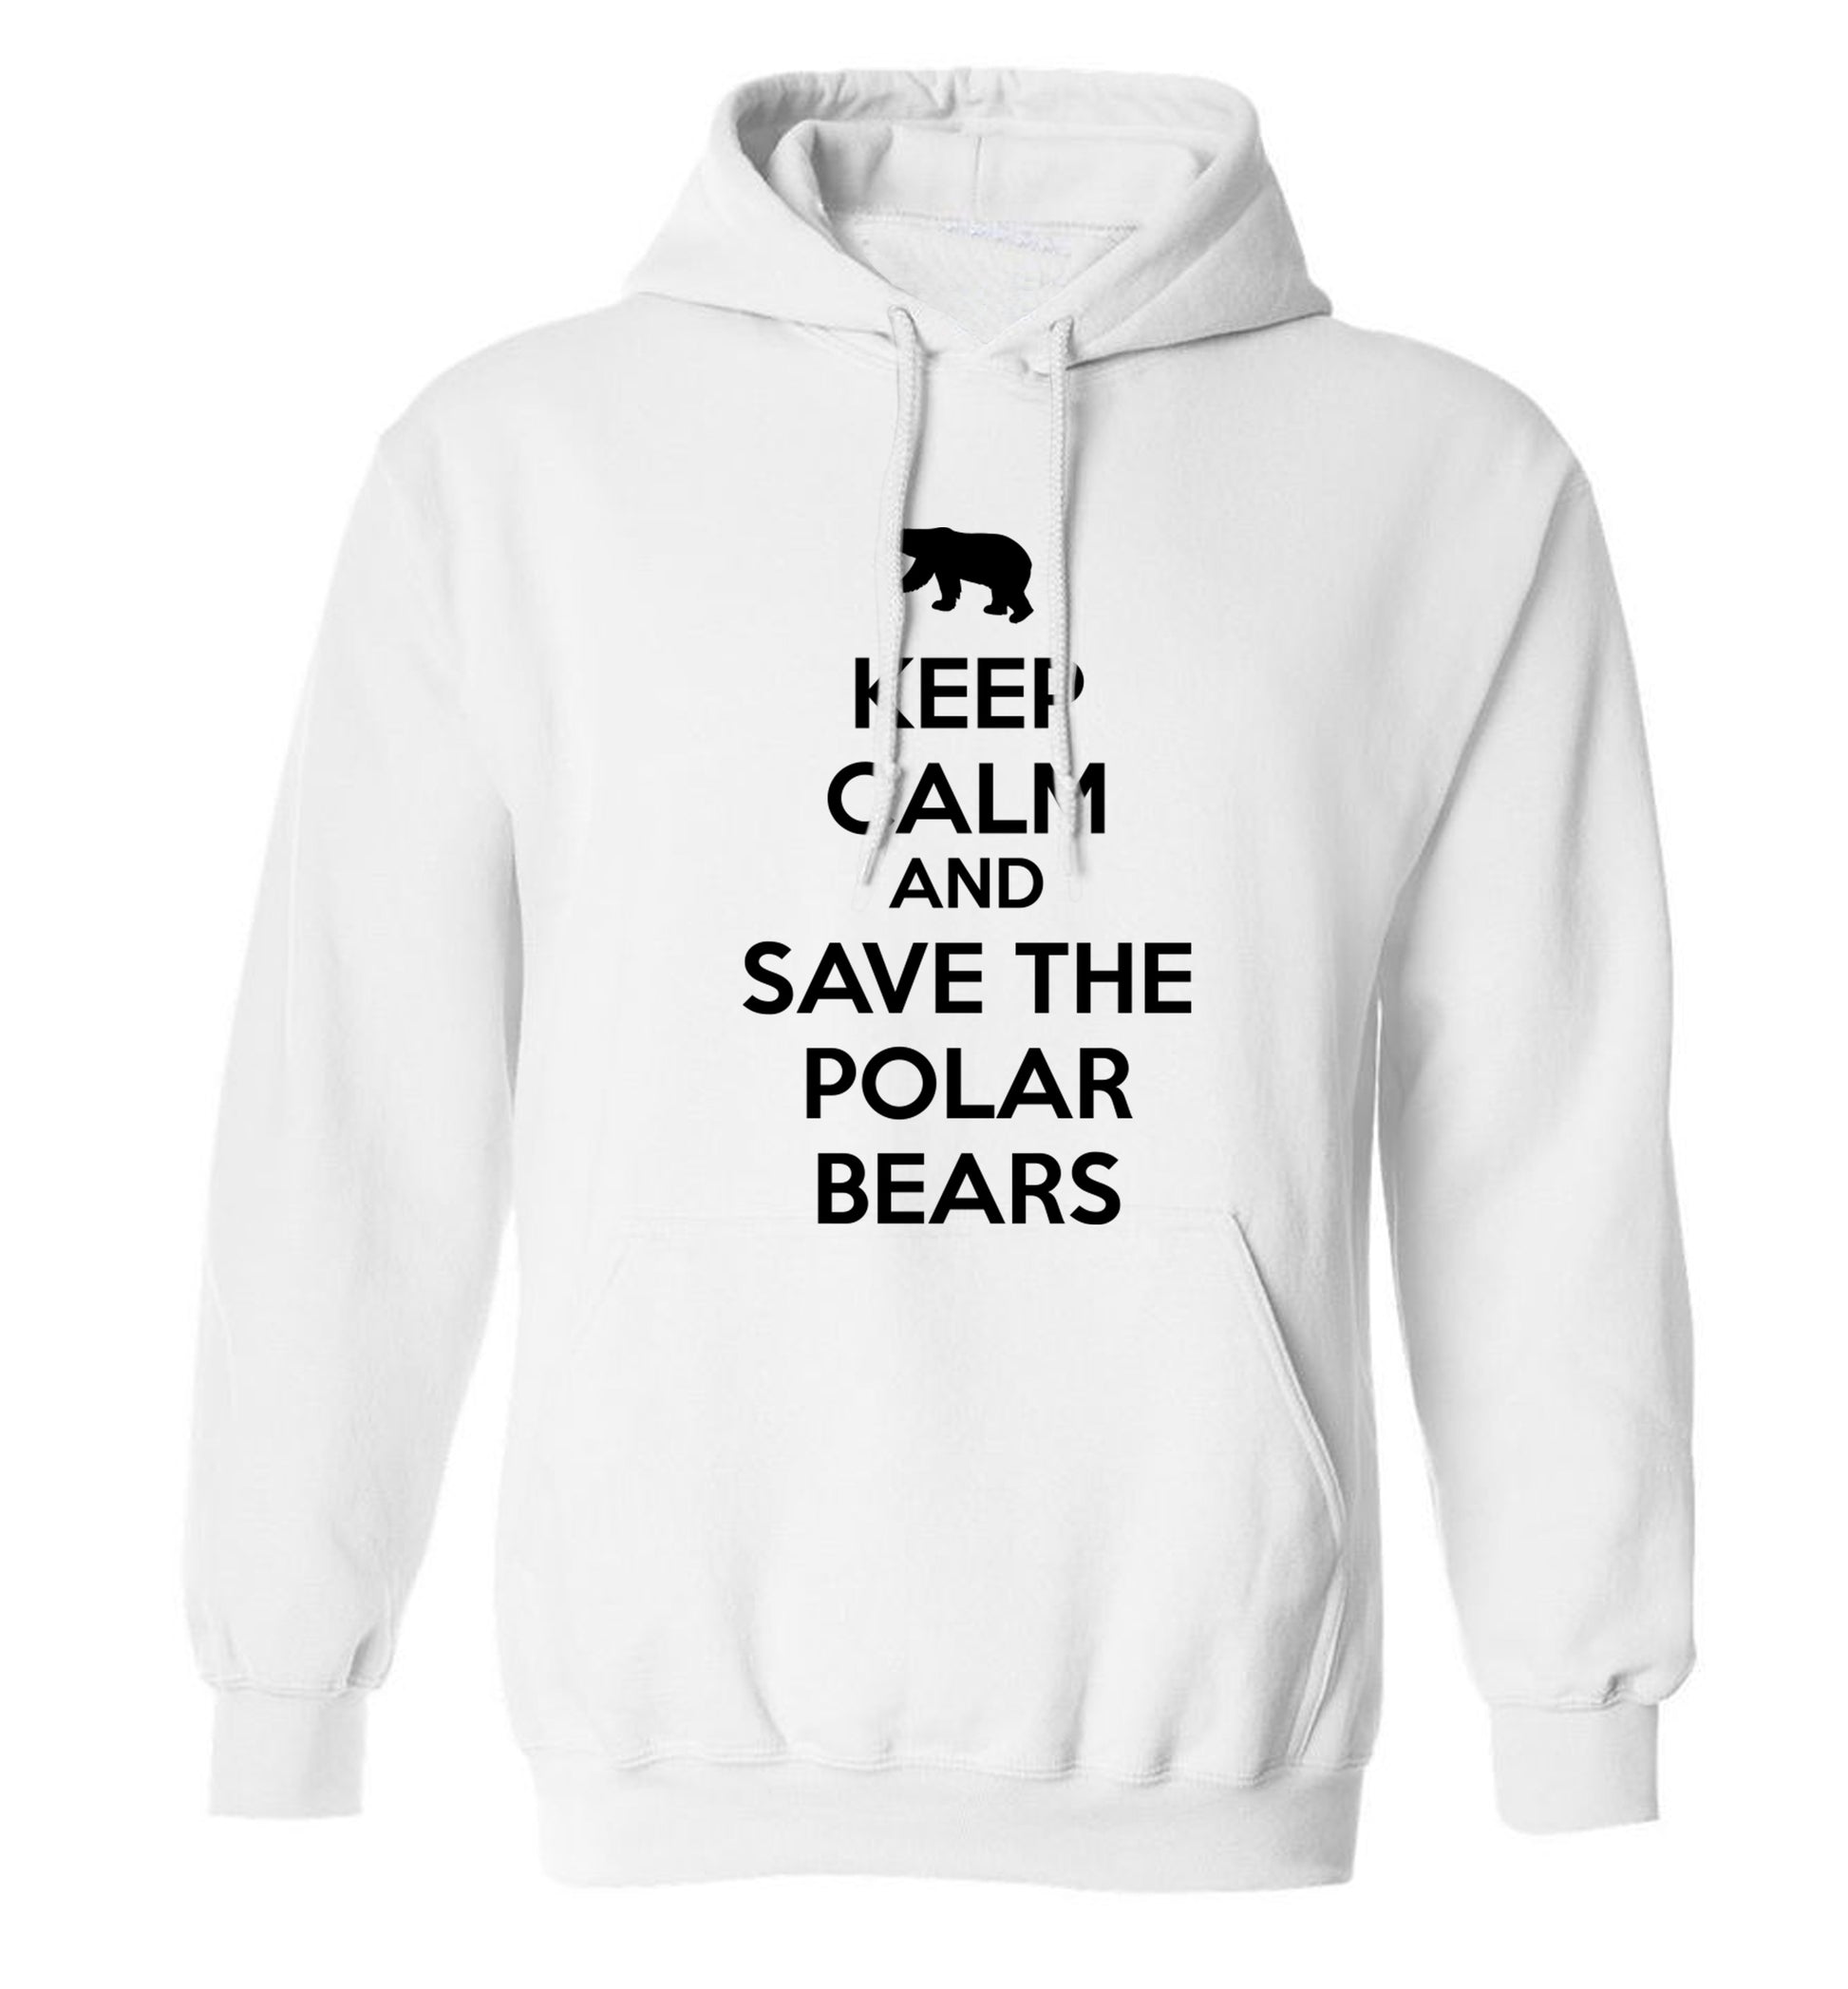 Keep calm and save the polar bears adults unisex white hoodie 2XL